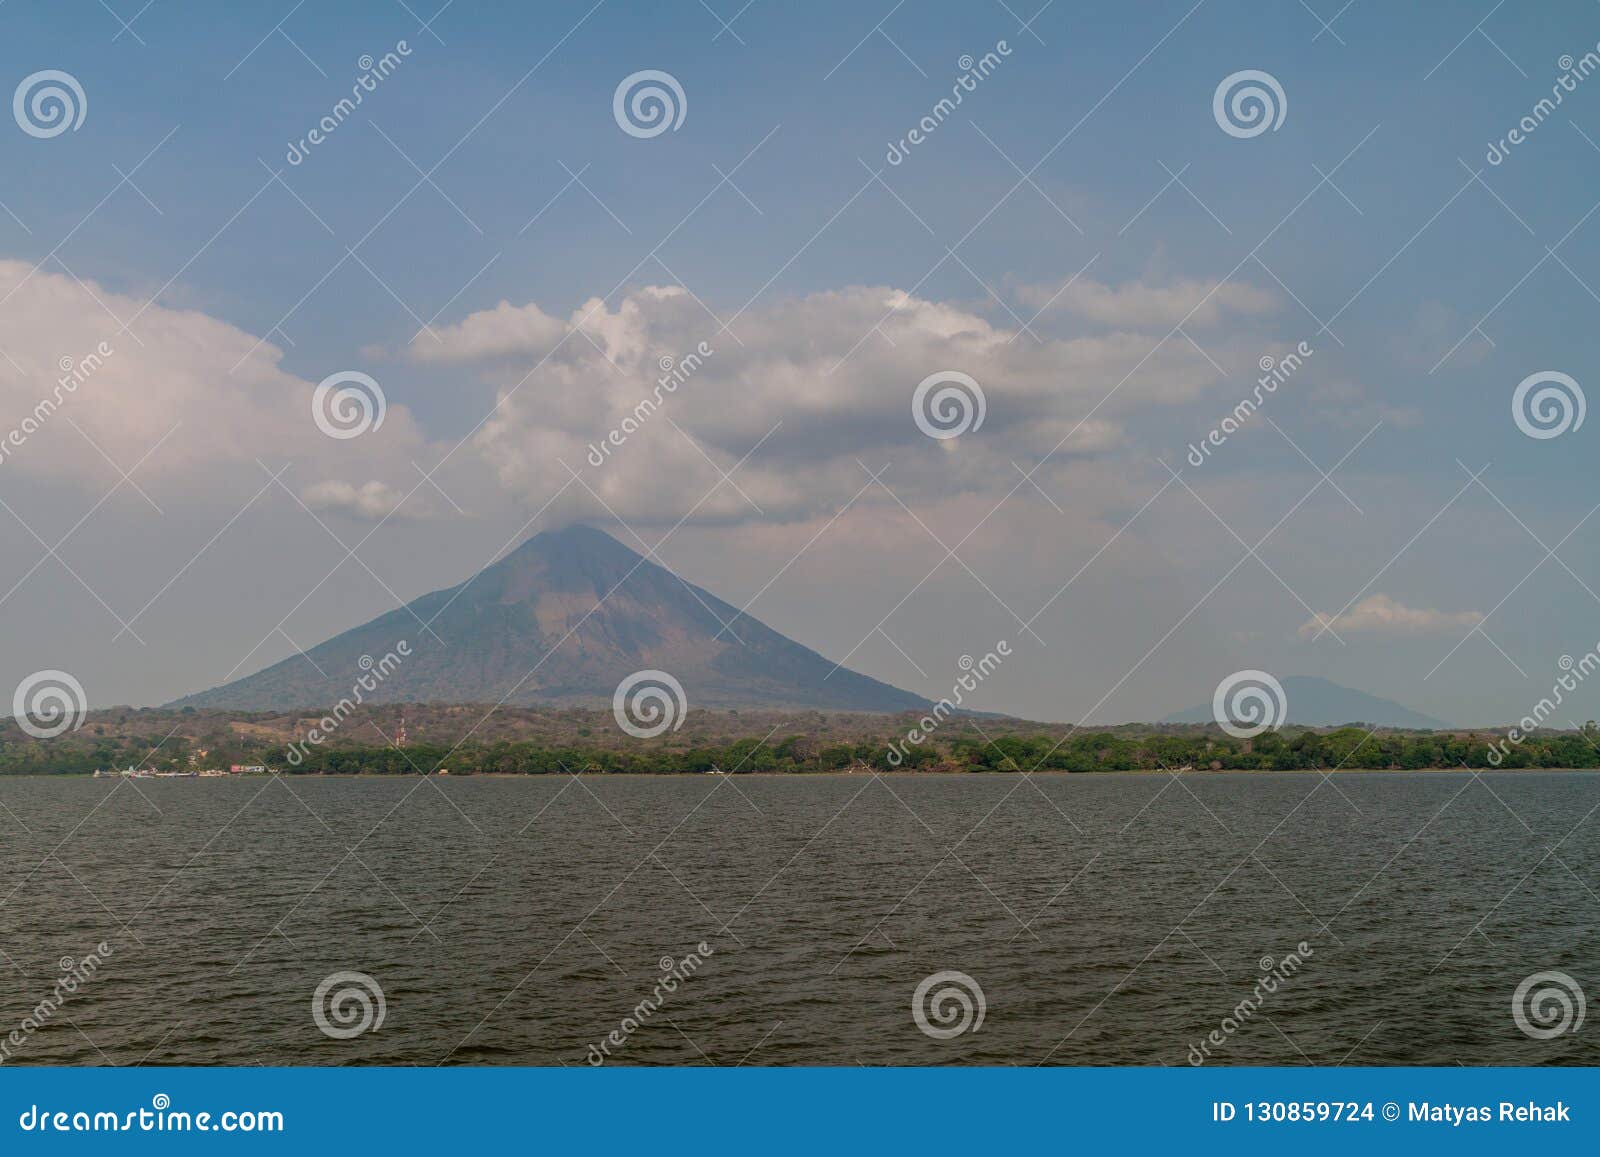 ometepe island in nicaragua lake. volcanoes concepcion left and maderas right